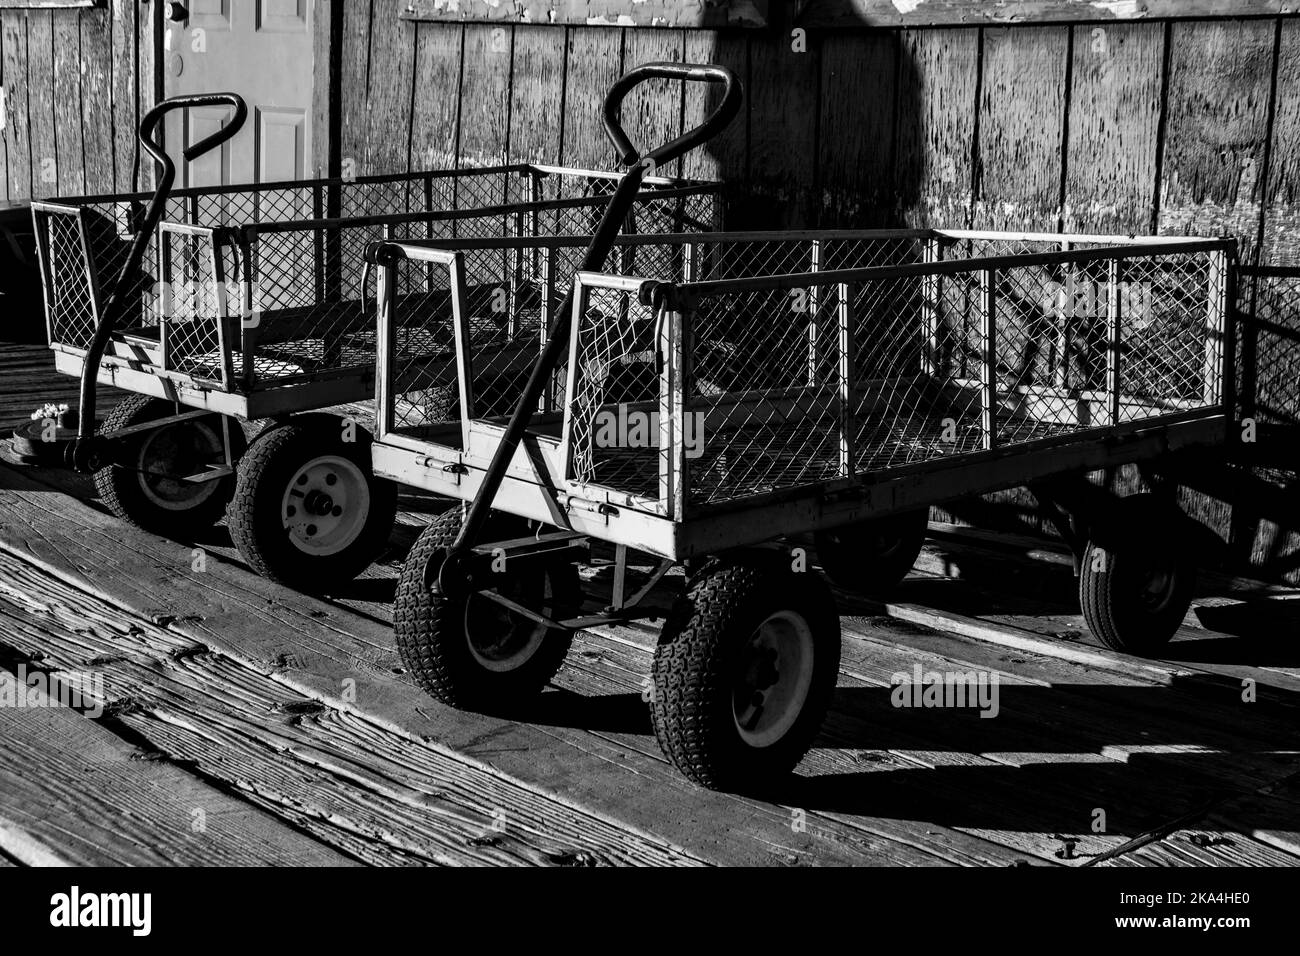 metal wire carts parked next to the outside wall, and wood boardwalk. Stock Photo